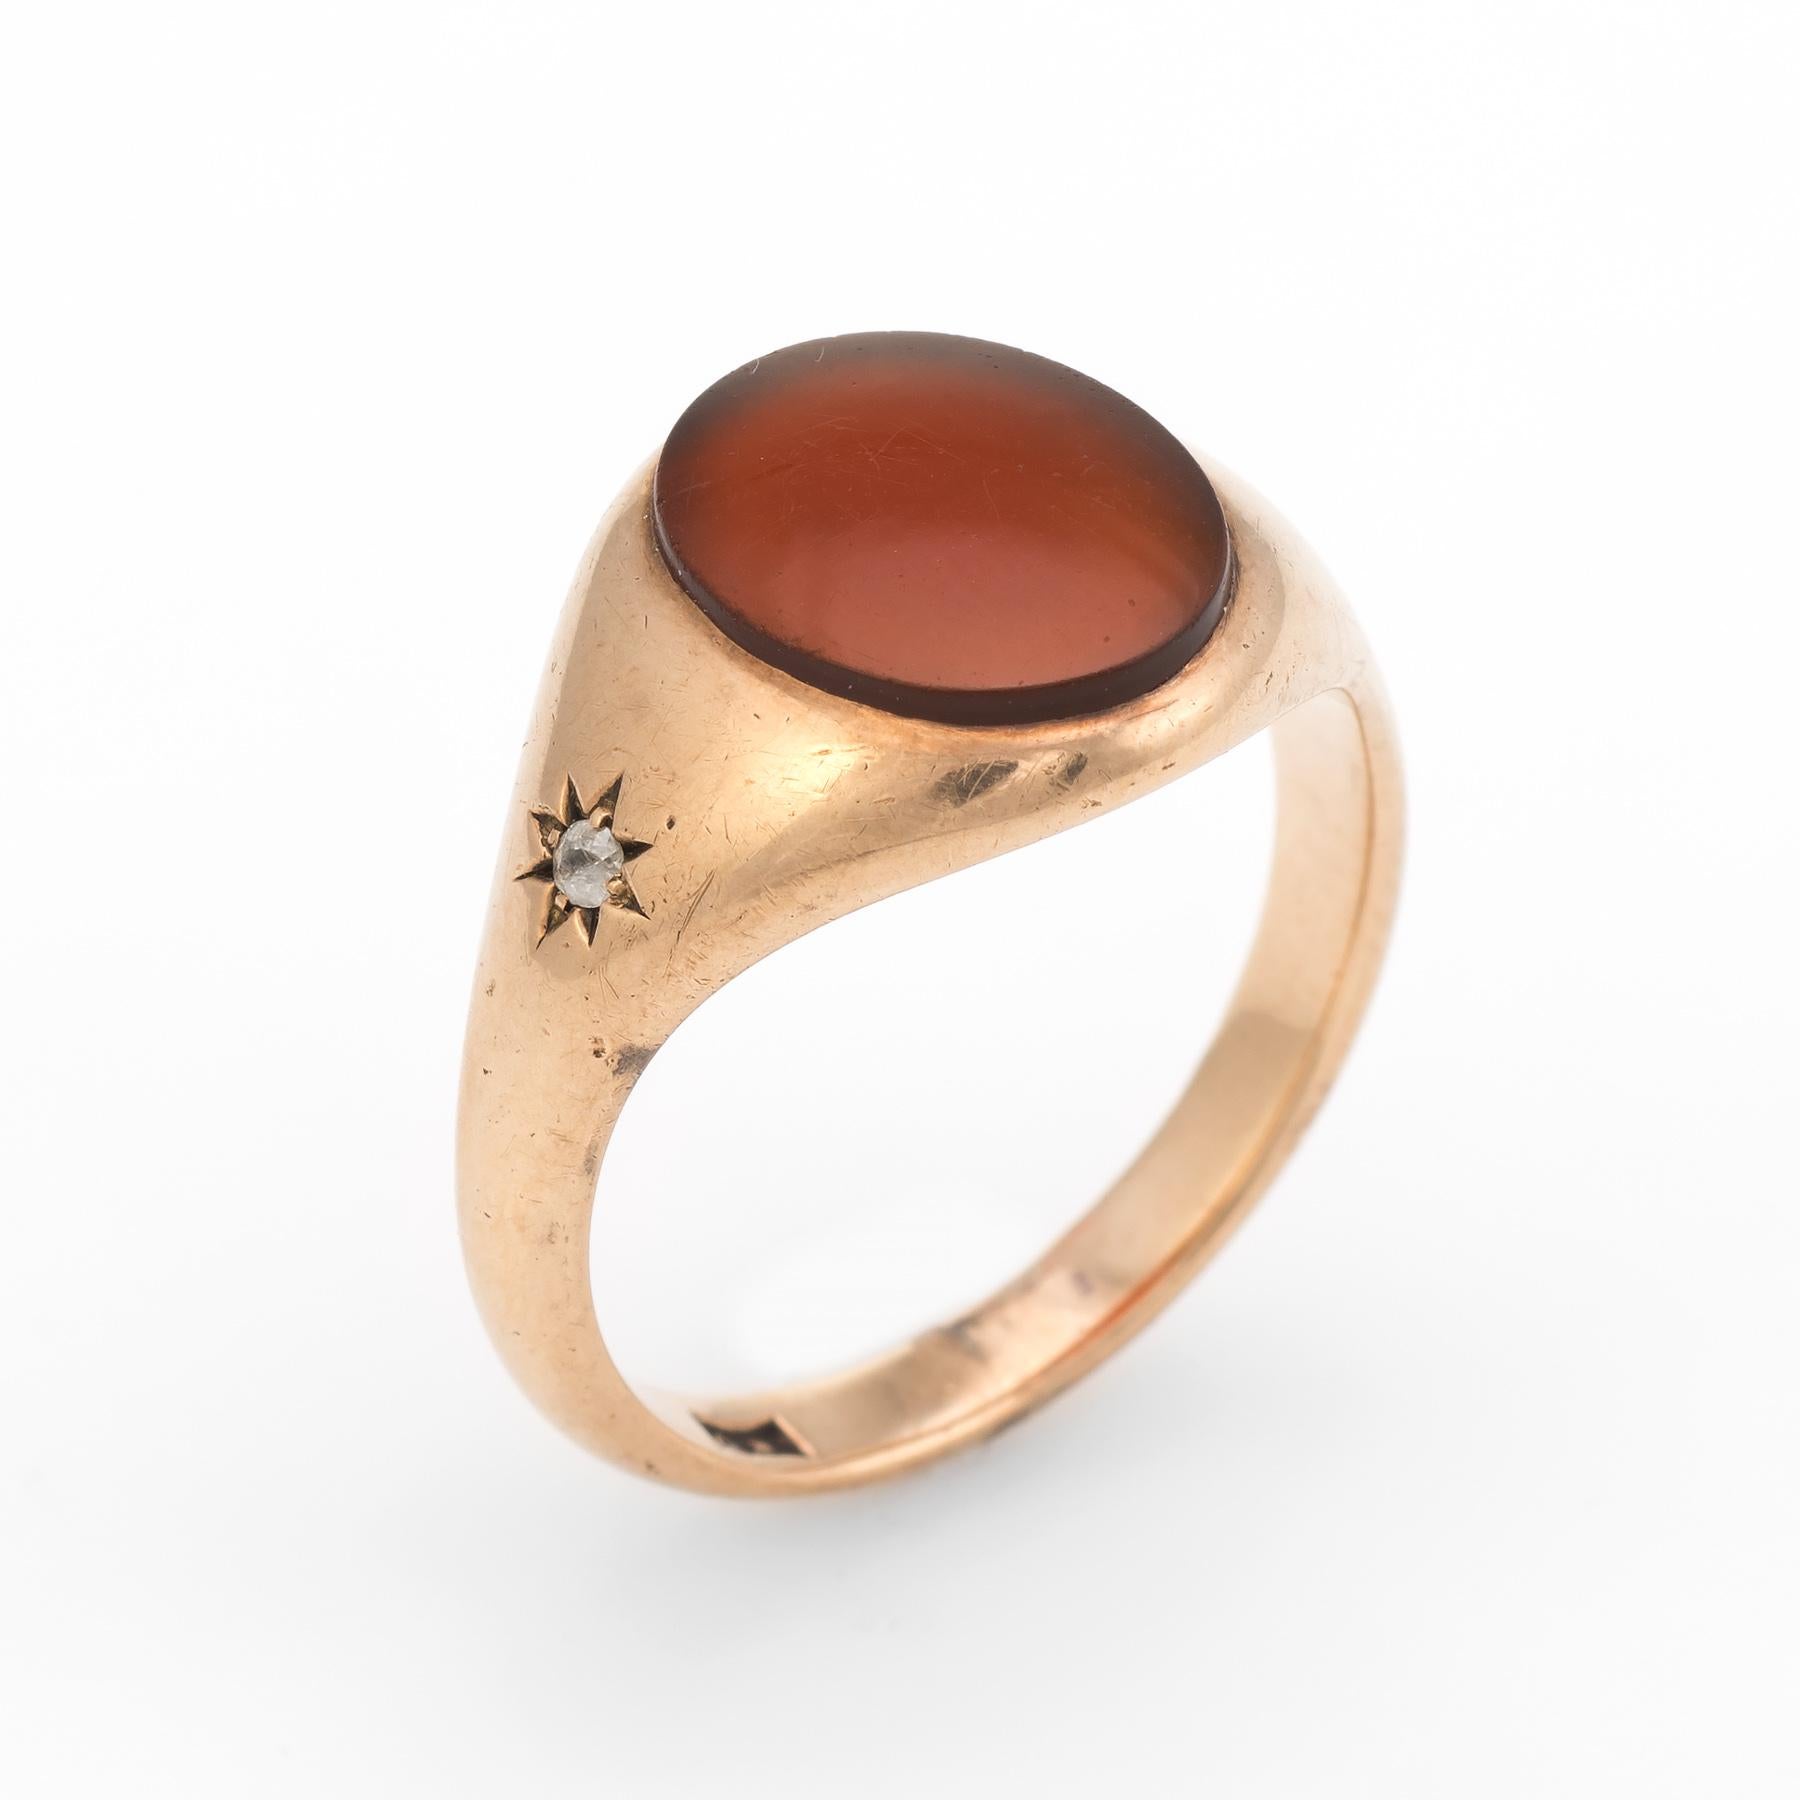 Finely detailed vintage Art Deco era ring (circa 1920s to 1930s), crafted in 10 karat rose gold. 

Oval cut Carnelian measures 11.8mm x 10mm (estimated at 6.5 carats), accented with two estimated 0.01 carat old mine cut diamonds (0.02 carats total